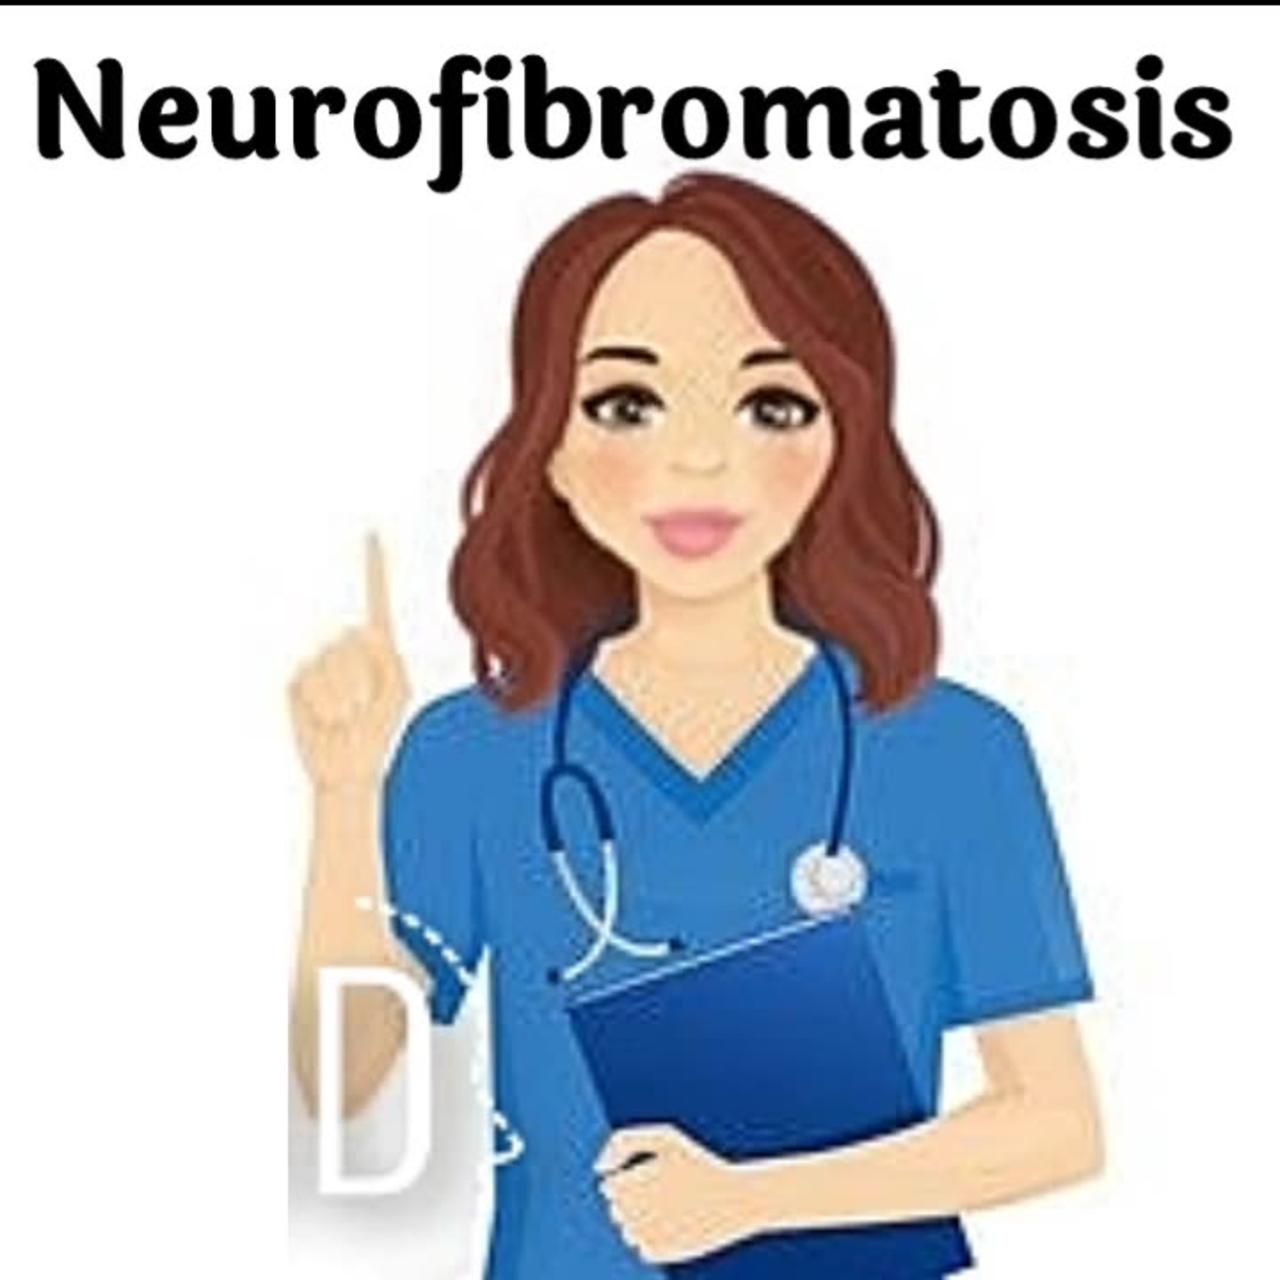 live a normal life with neurofibromatosis